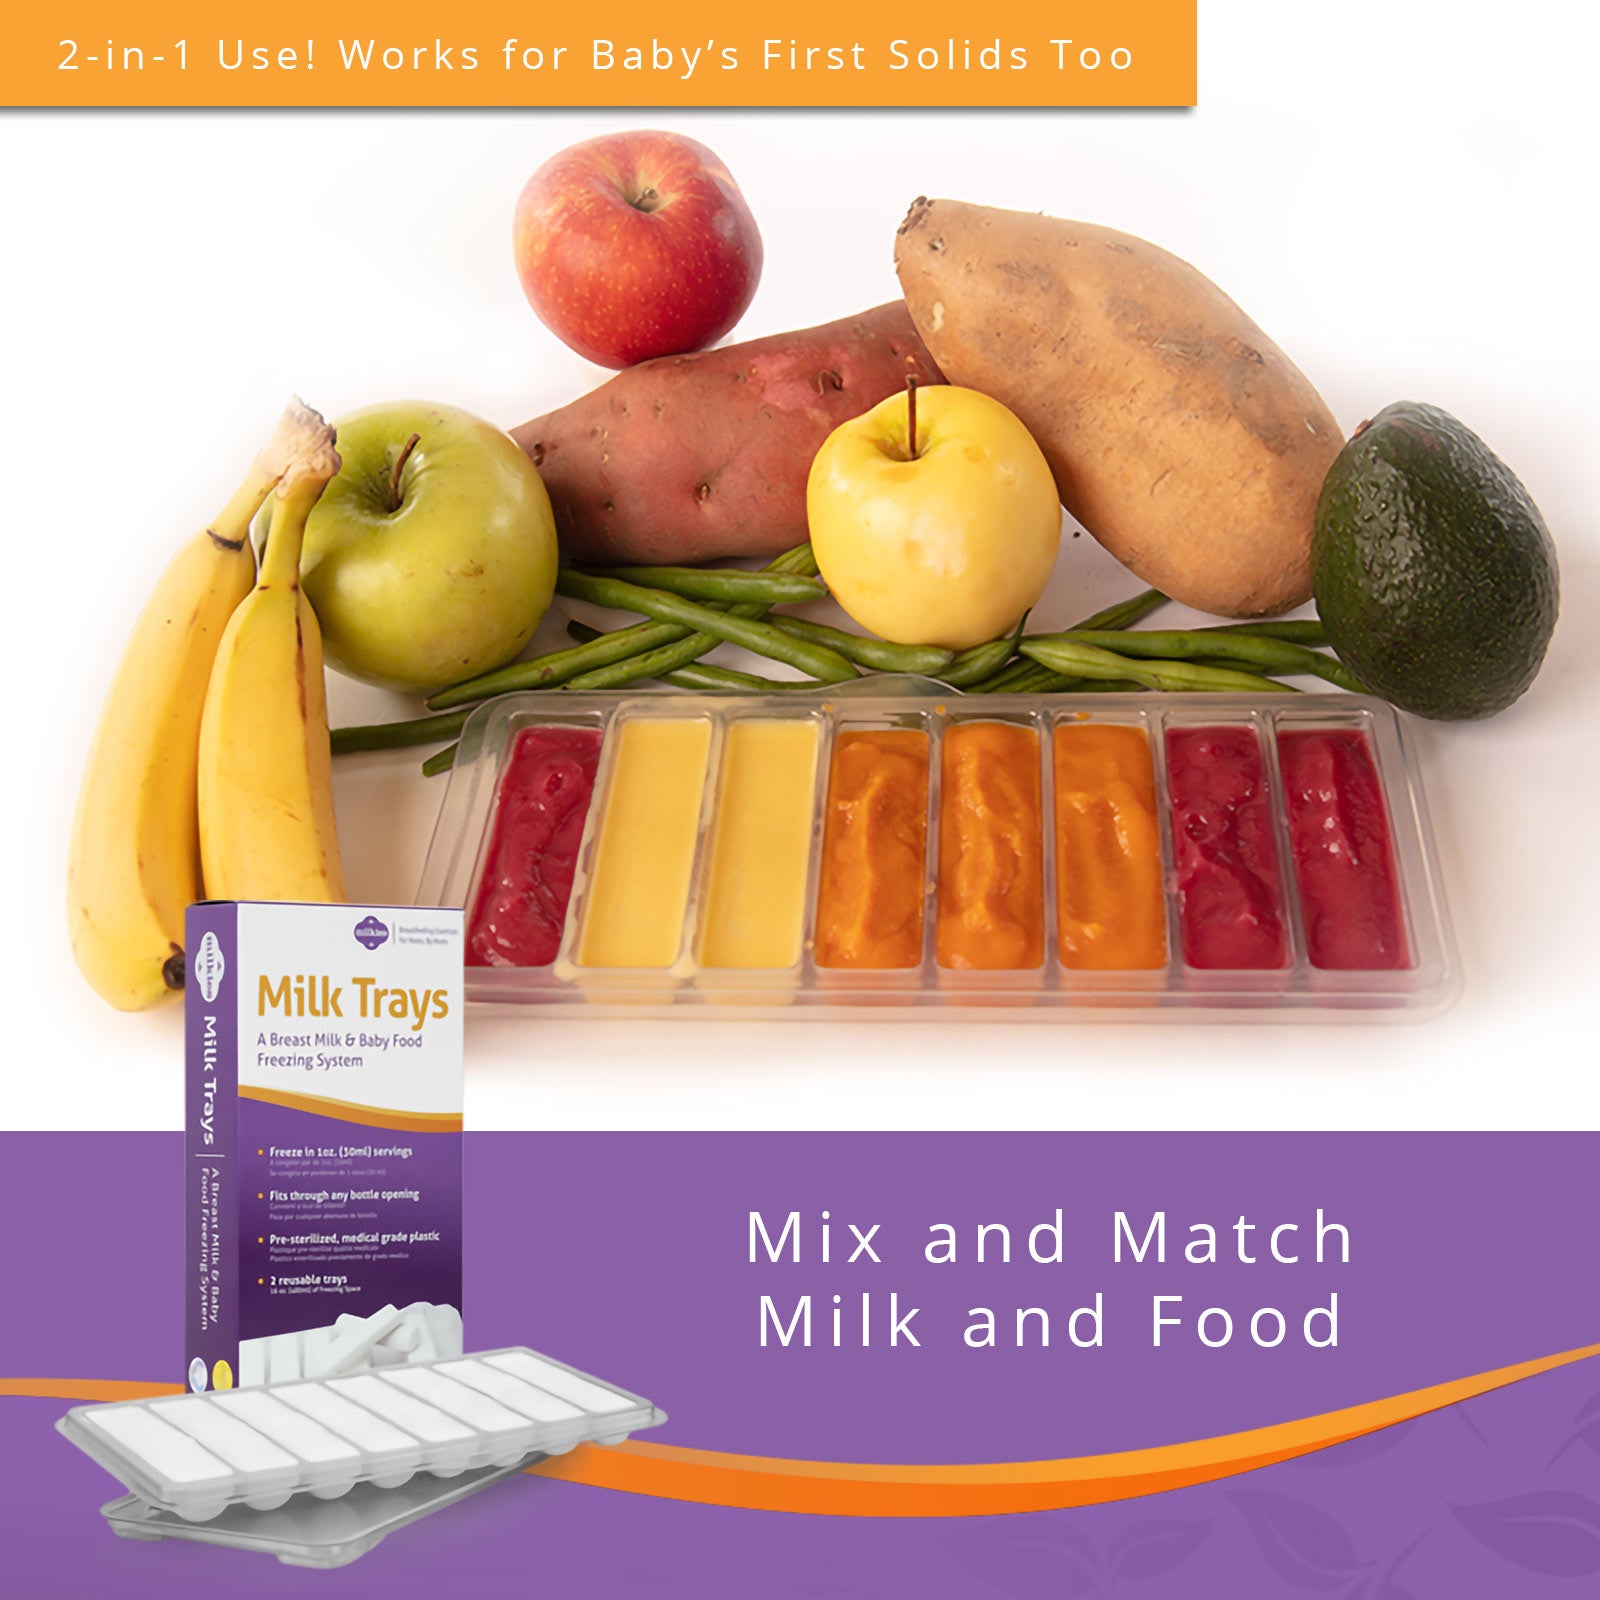 Mix and Match Breastmilk and Food